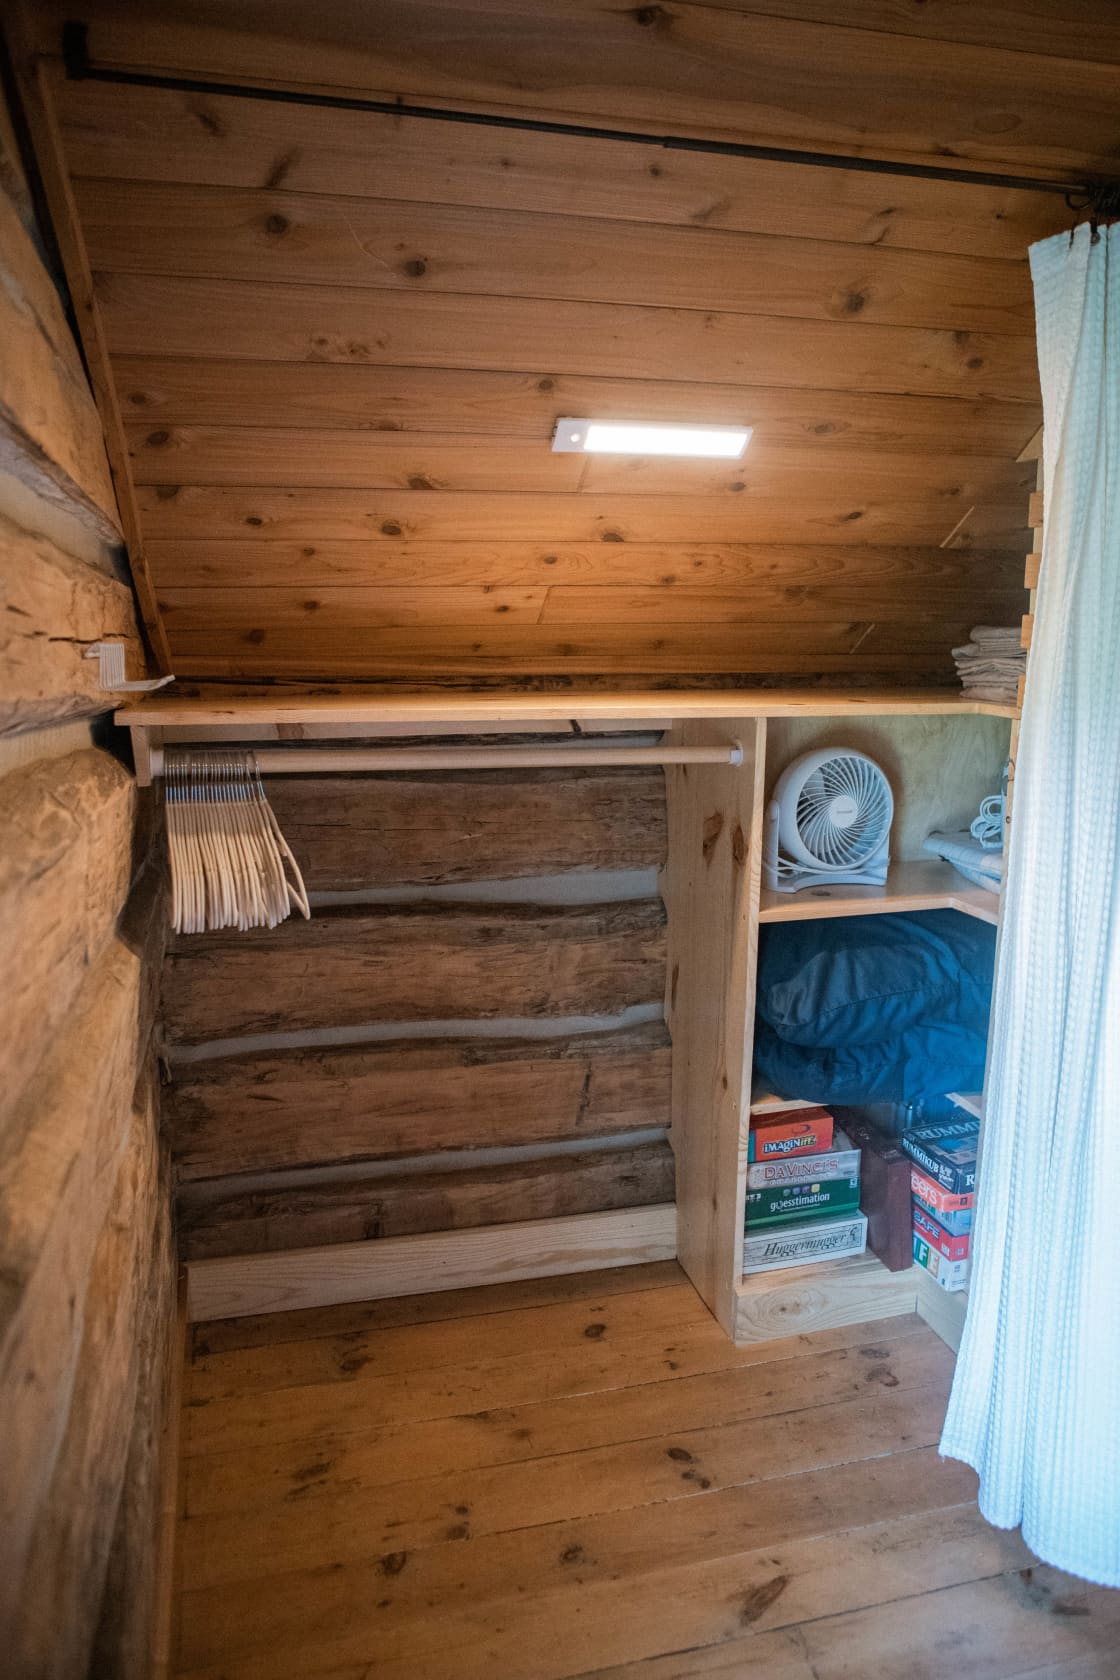 Plenty of storage area and room to hang your clothes in the bedroom closet!